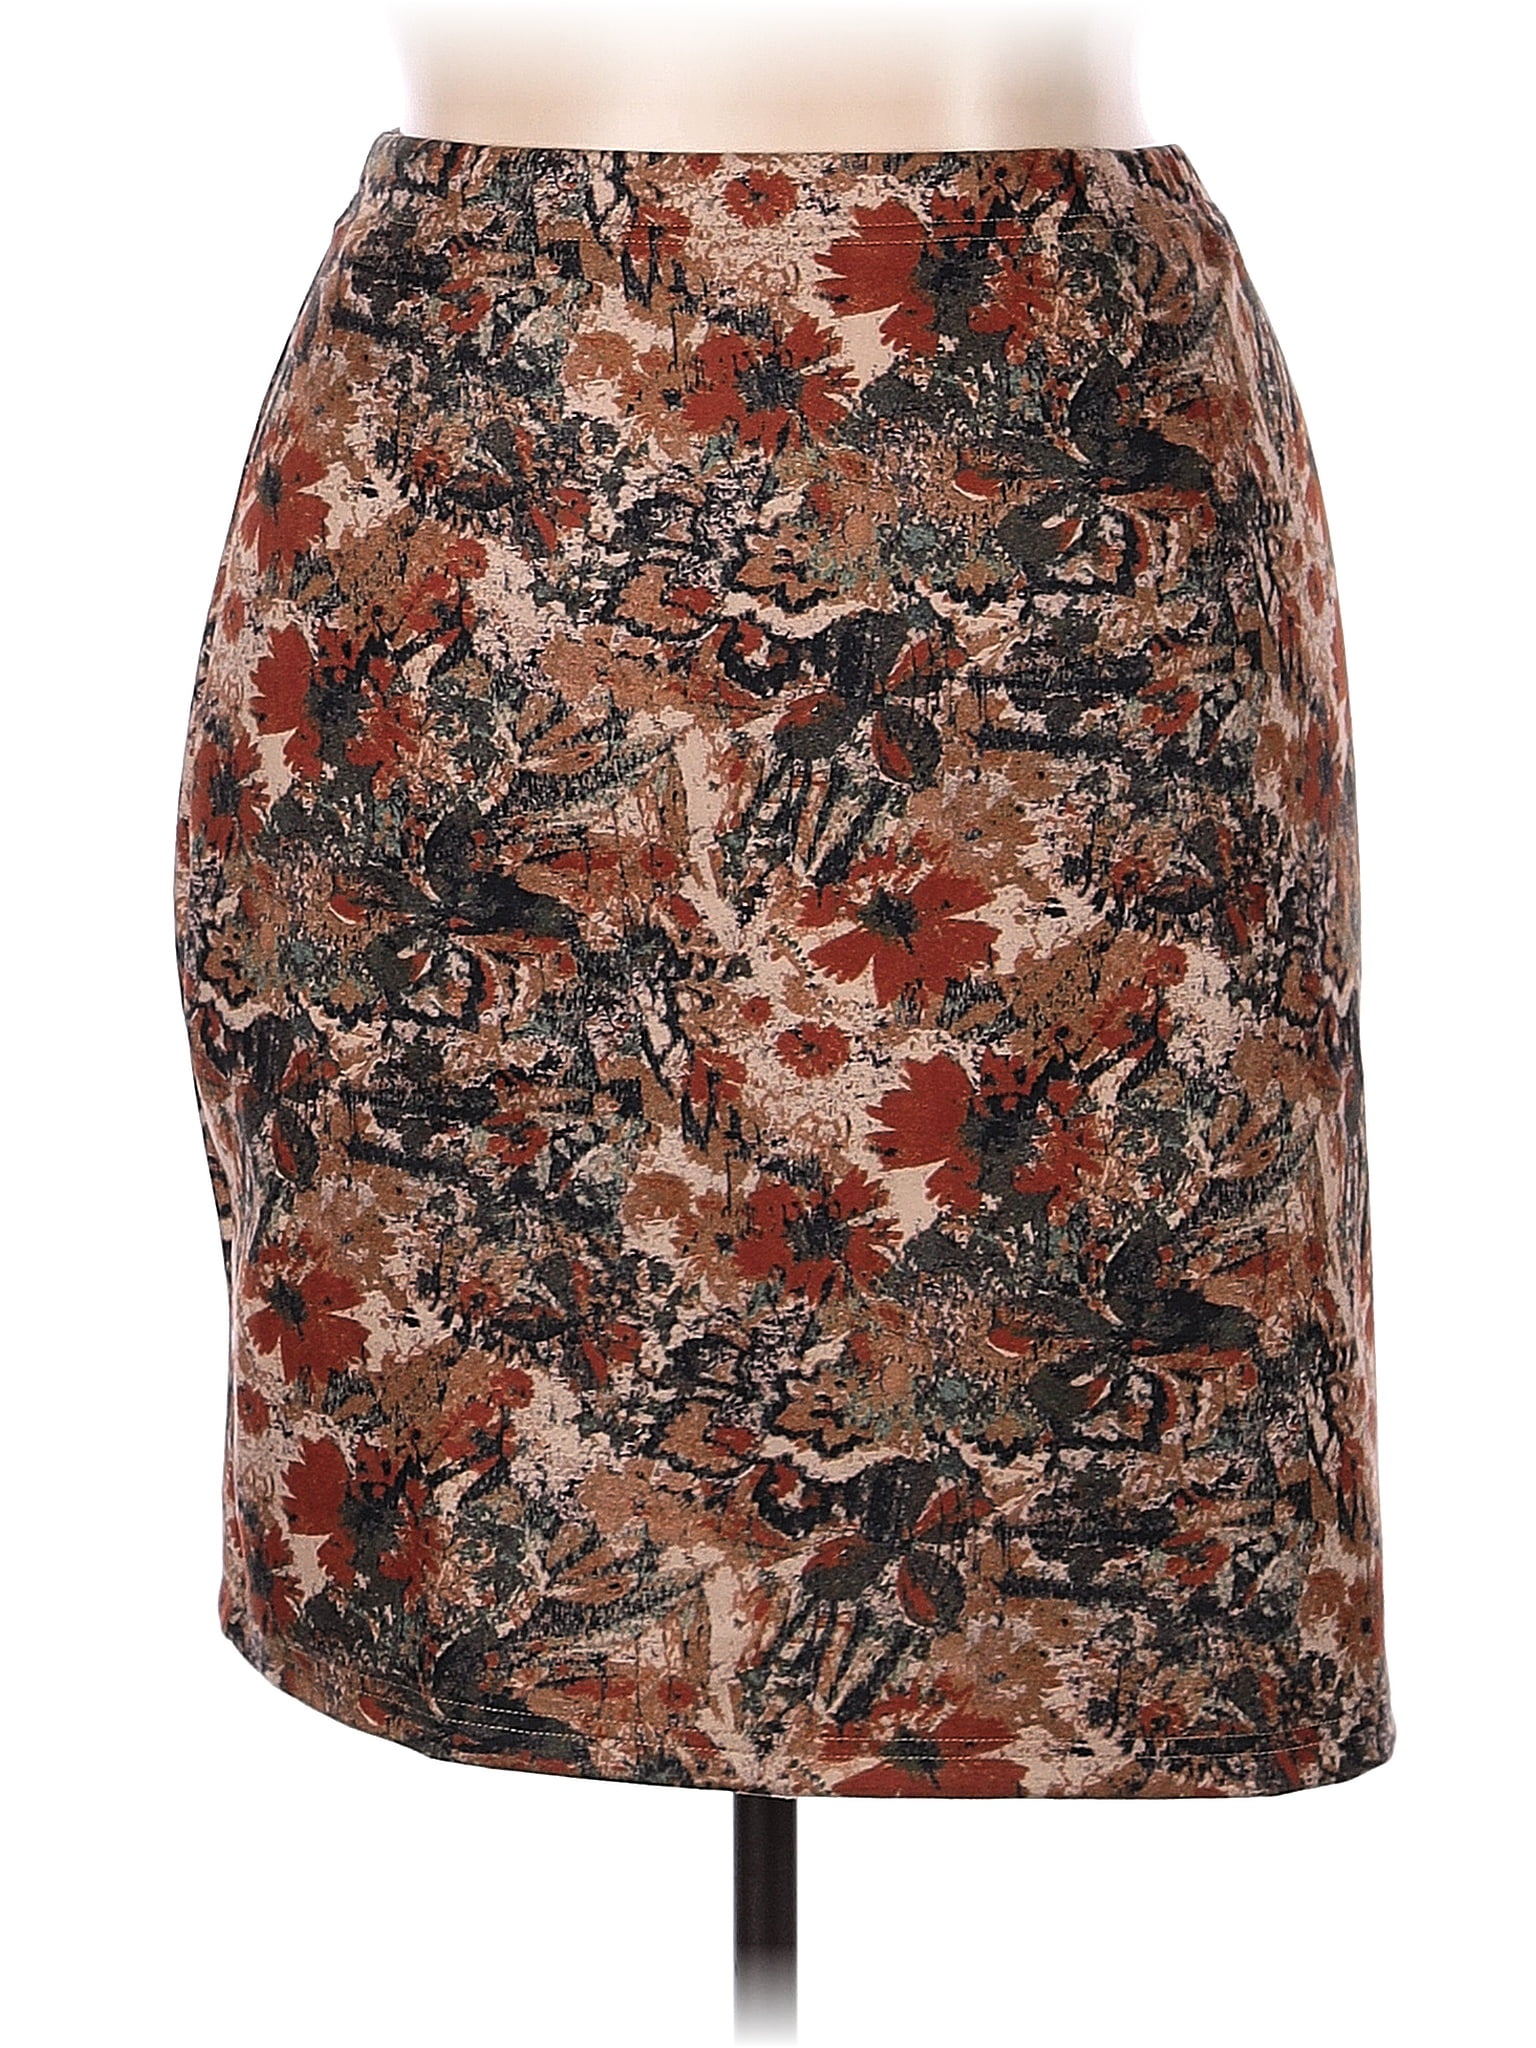 Shein 100% Polyester Floral Multi Color Brown Casual Skirt Size 5X ...